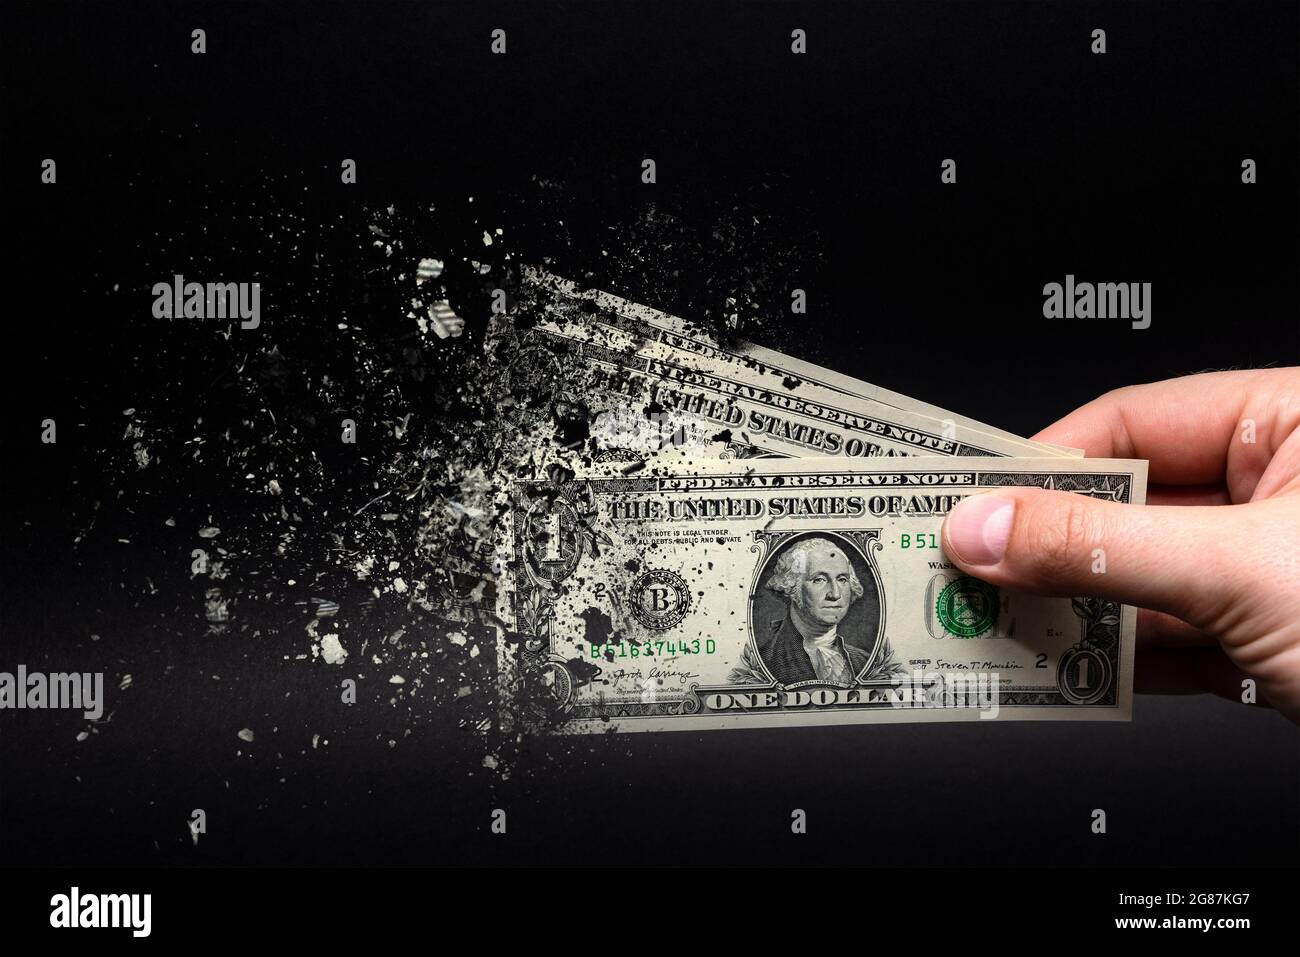 Spend money, spend all your money illiterately. The dollar bill turns to ash, dissolves against a black background. Place for text. Stock Photo